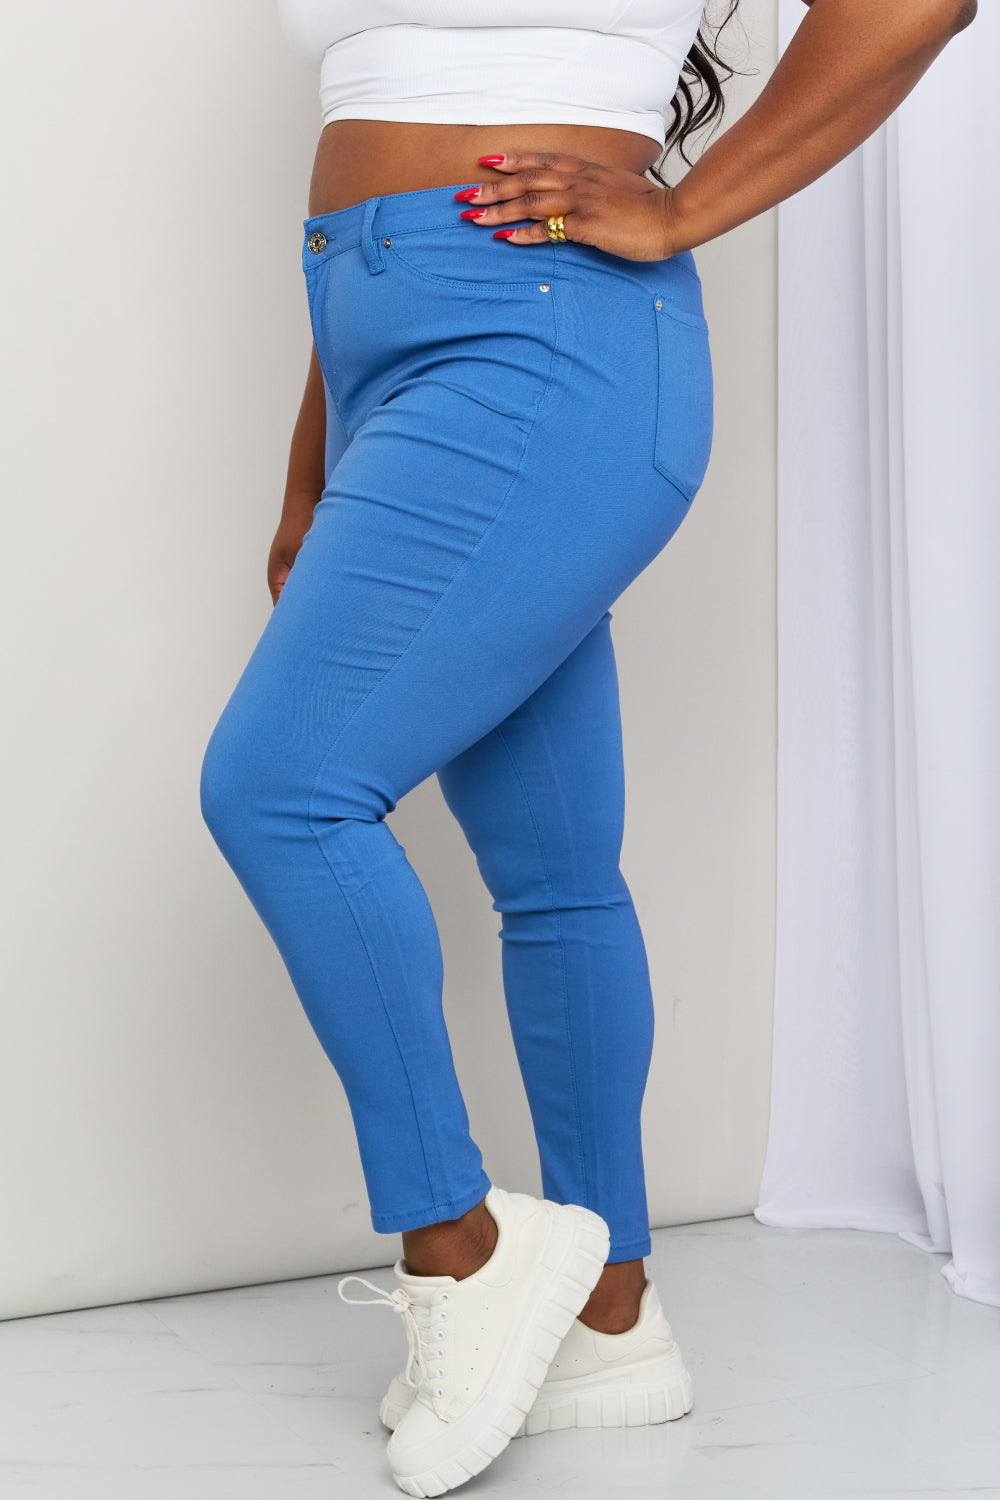 Jeanswear Kate Hyper-Stretch Full Size Mid-Rise Skinny Jeans in Electric Blue DromedarShop.com Online Boutique